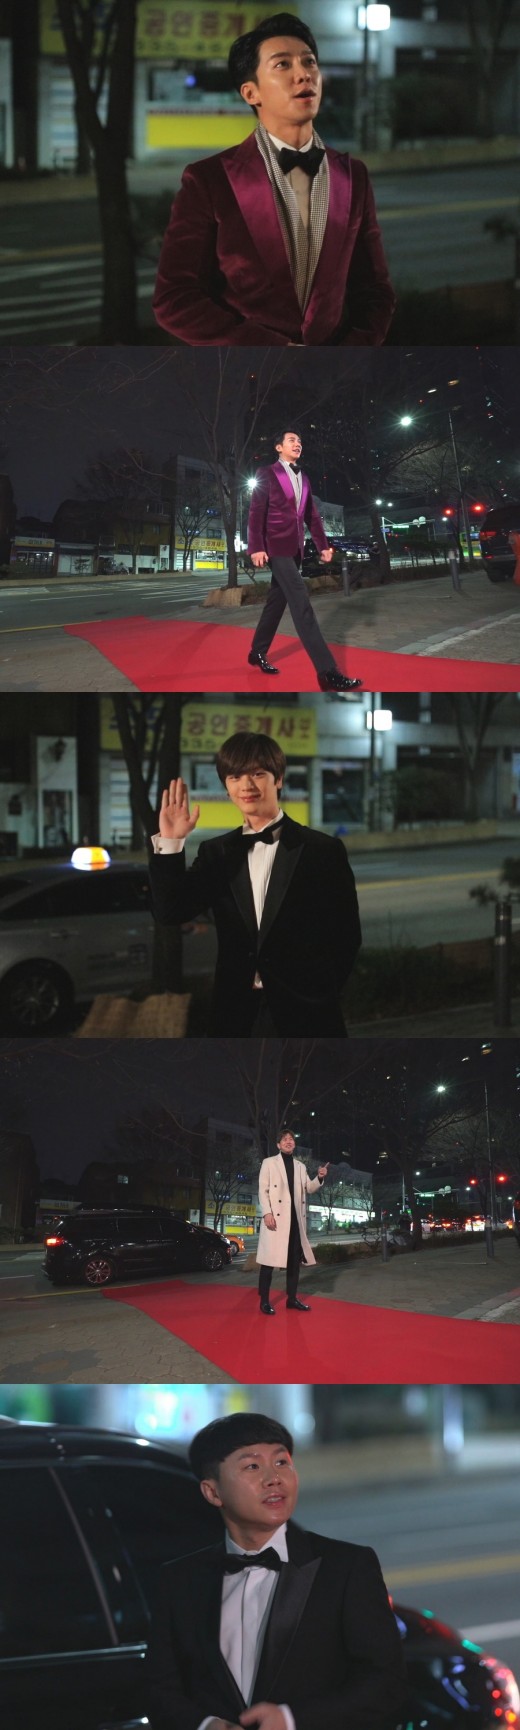 All The Butlers members stand on the Red Carpet in a suit.On SBS All The Butlers to be broadcast on the 30th, Lee Seung-gi Lee Sang-yoon will be released at 6 am Red Carpet runway.Members gathered for the 2018 Year-end Settlement feature appeared in colorful costumes reminiscent of the awards ceremony, despite the early dawn hours.But the place where Red Carpet was laid was not the same, but the lonely dawn air was all that welcomed the members.The members who woke up from dawn to stand in Red Carpet could not hide the smile that leaked out saying Is it really here?The production team delivered another Hwangdang Mission to the members, It was the first time I was born here wearing a tuxedo.The members said, I did not even have to do this, but do you want me to do this? Is this why I gathered here?The members Red Carpet runway scene at 6 am will be confirmed through All The Butlers, which will be broadcasted at 6:25 pm on the 30th.